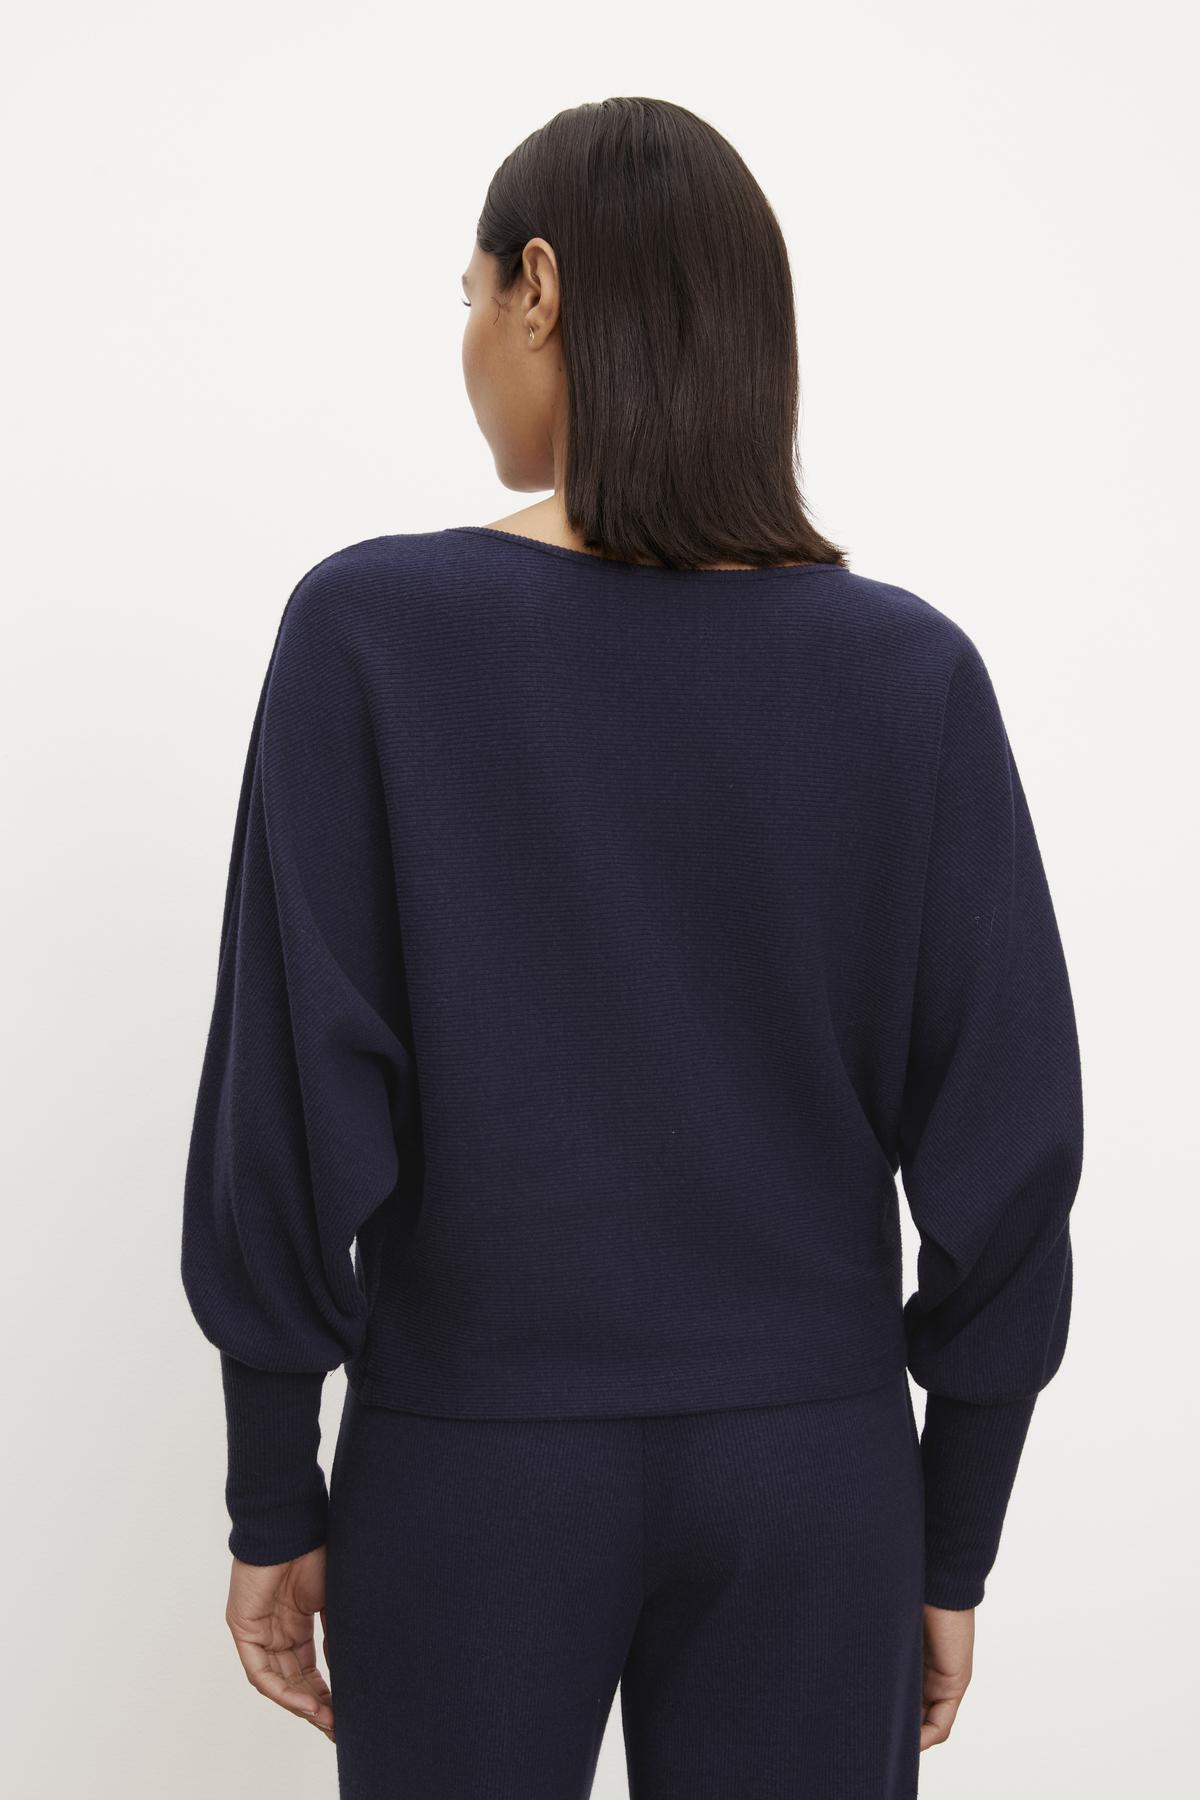 The back view of a woman wearing a Velvet by Graham & Spencer MACKAY BRUSHED RIB TOP sweater and pants.-35702094758081